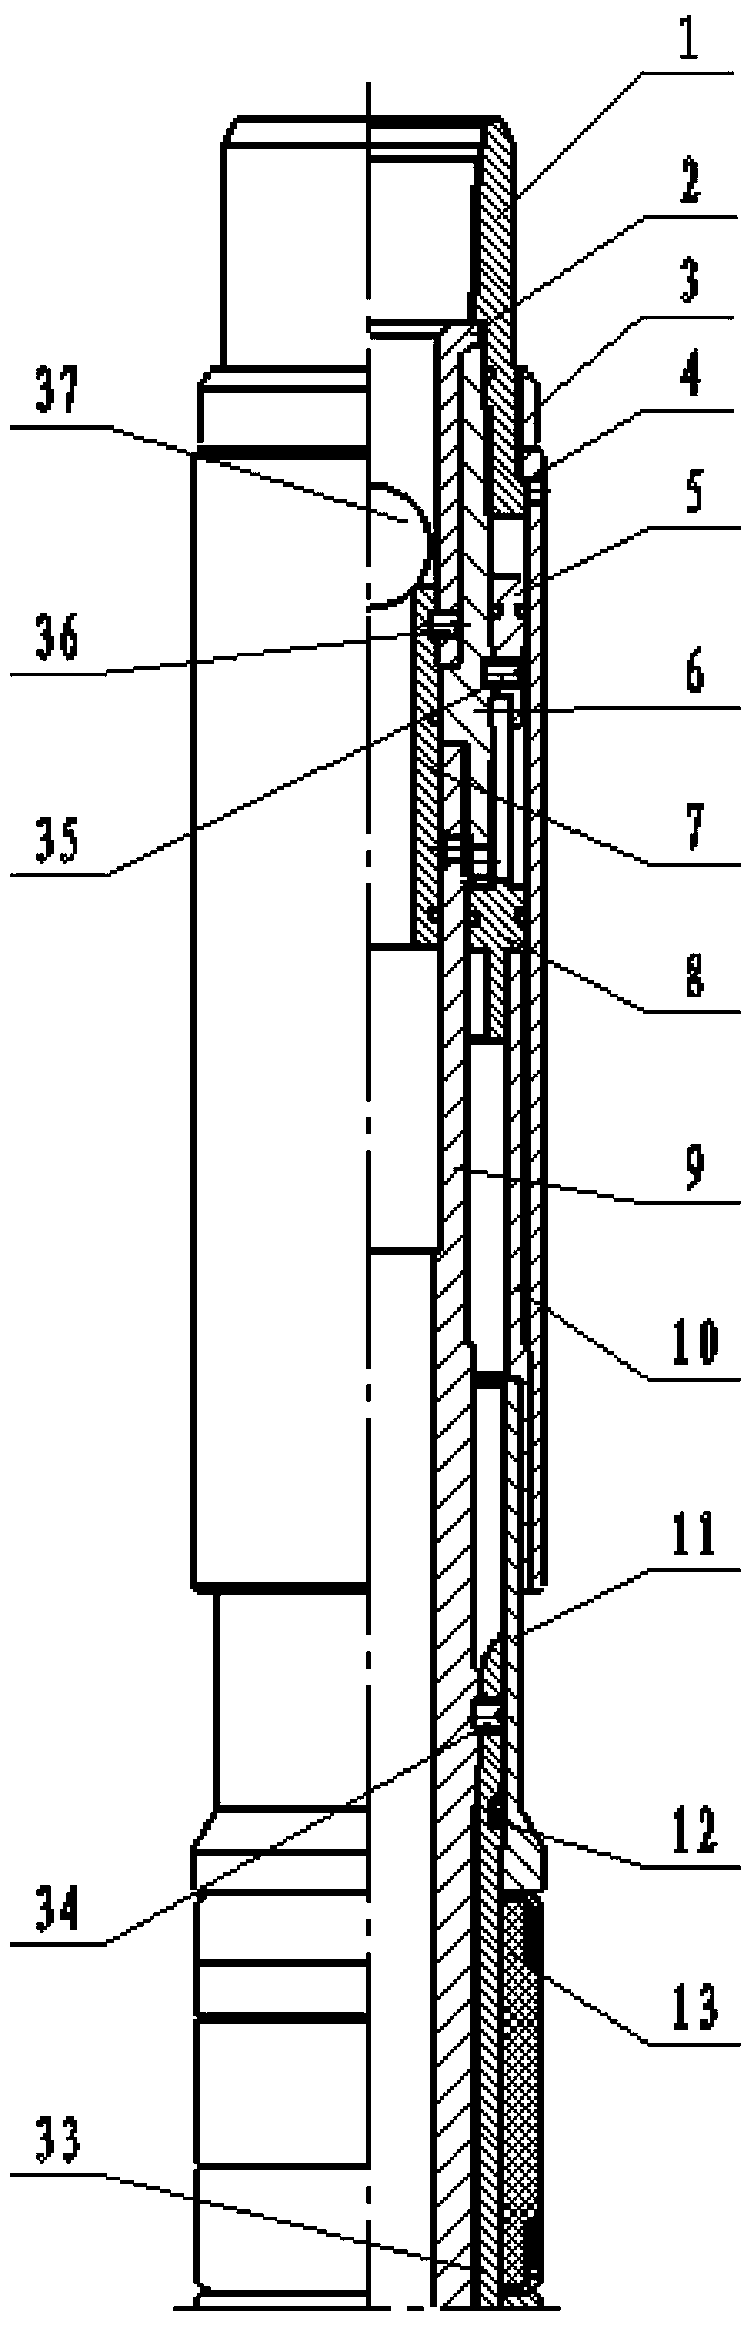 Separated layer water-flooding process tubular column capable of being drilled